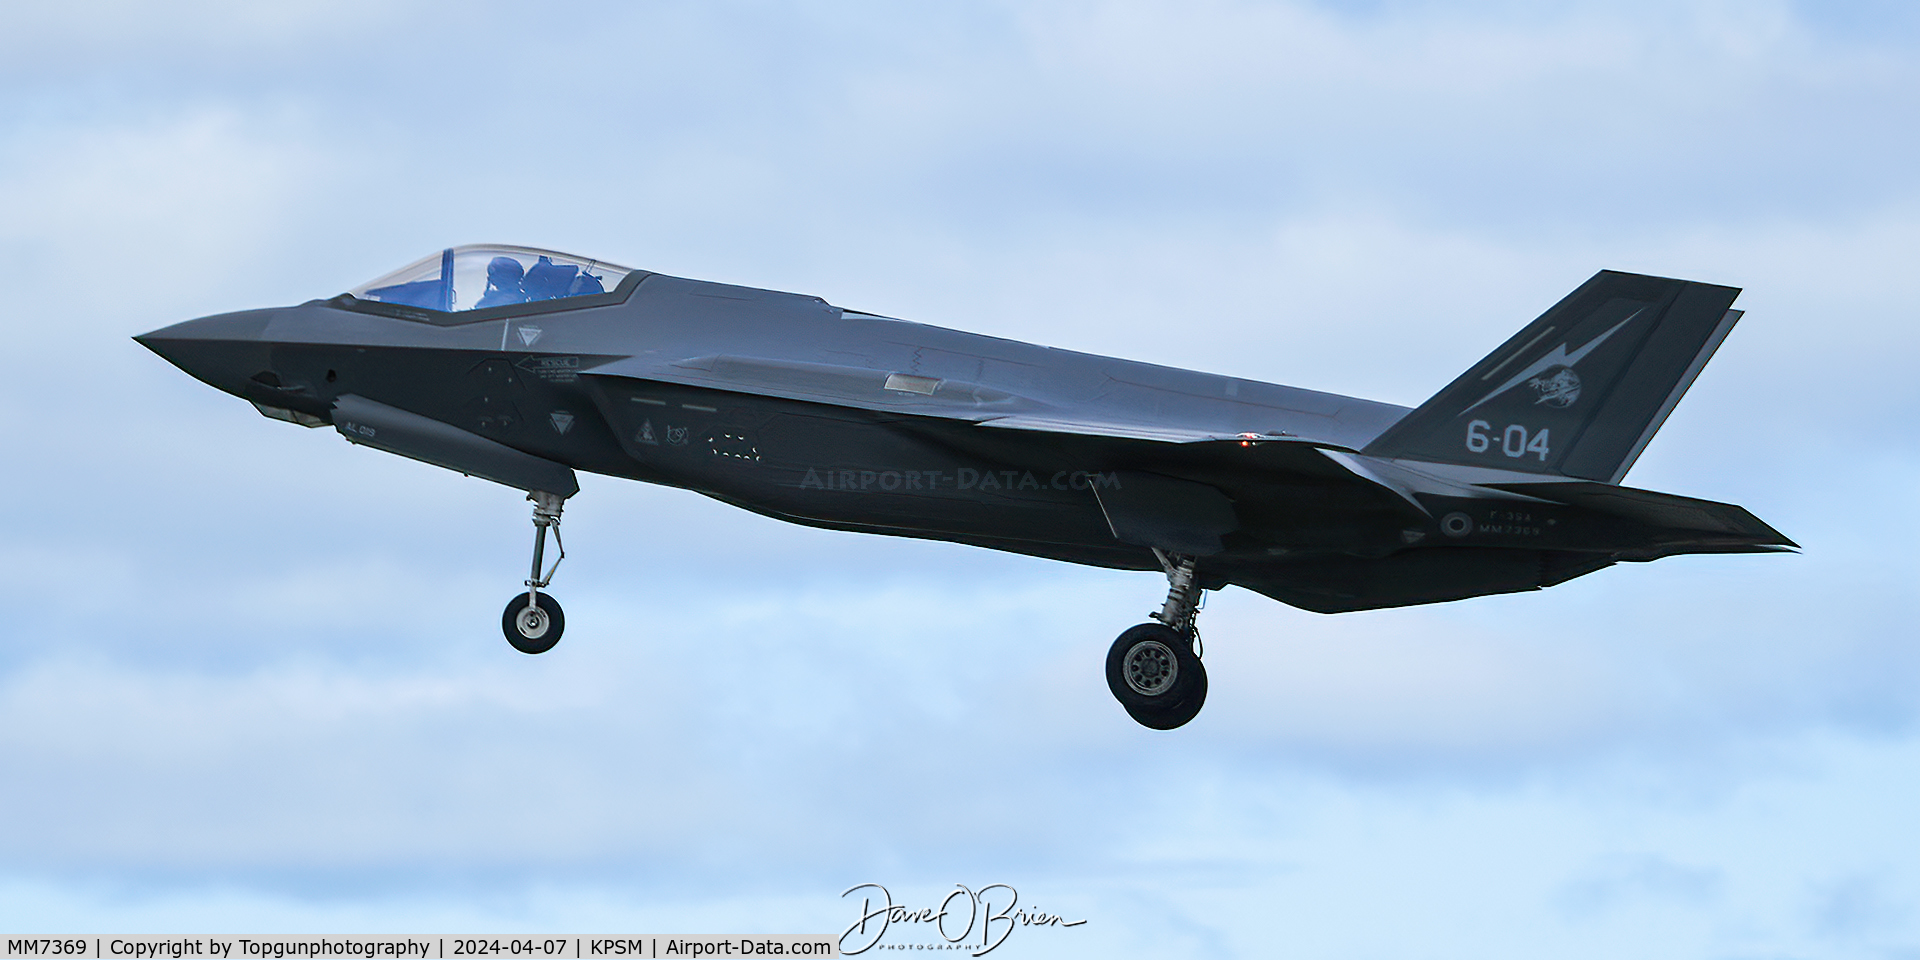 MM7369, Lockheed Martin F-35A Lightning II C/N AL-19, IAM0603 3rd one from first group of 35's landing